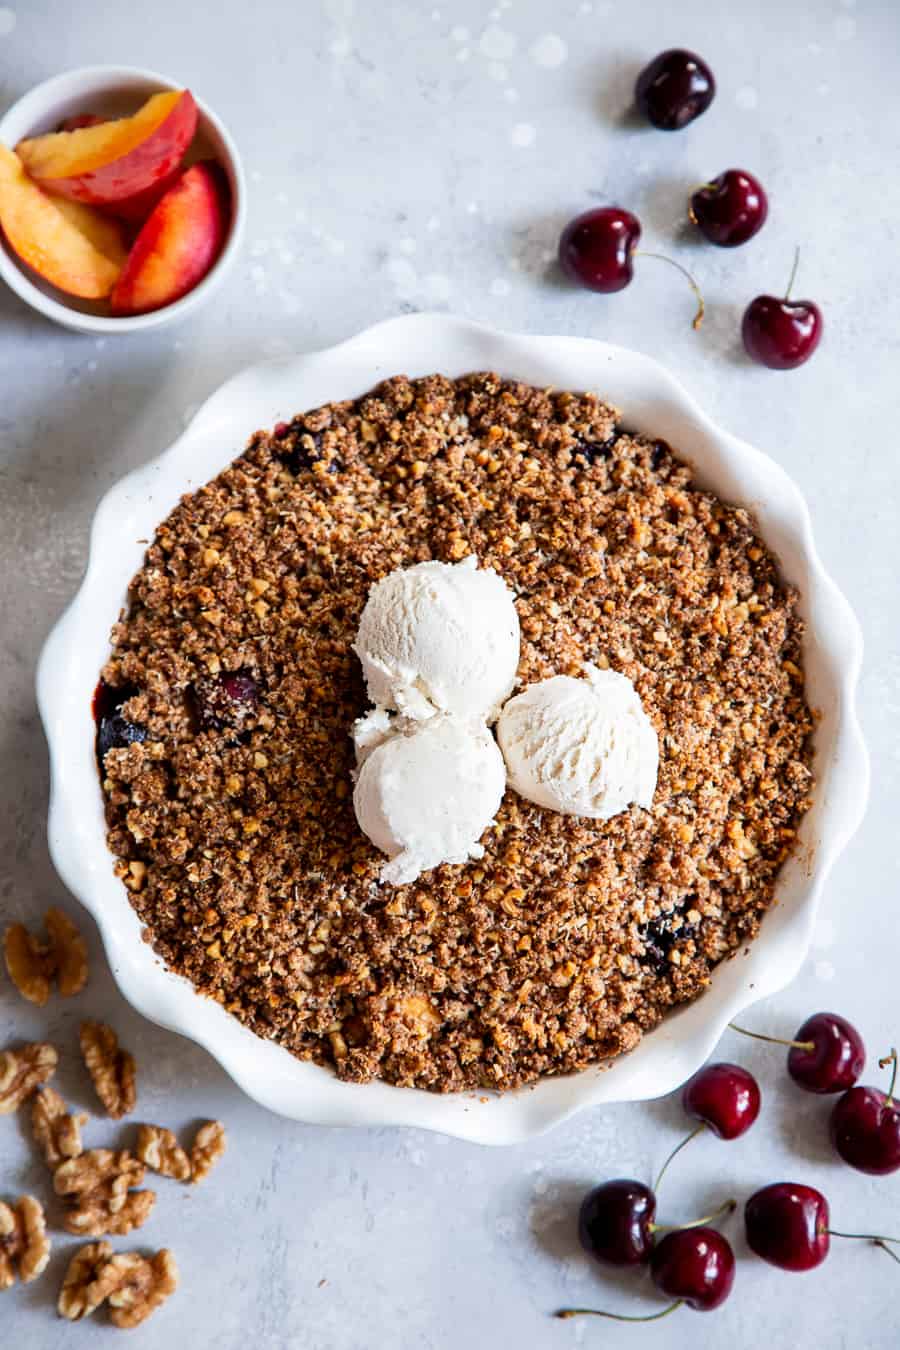 This cherry and peach crisp is irresistibly delicious and easy to make!  A sweet gooey peach and cherry filling is topped with a toasty crumble for a summer dessert that will make everyone come back for seconds.  It’s paleo, vegan, gluten-free, dairy-free and refined sugar free. #vegan #paleo #cleaneating #paleodessert